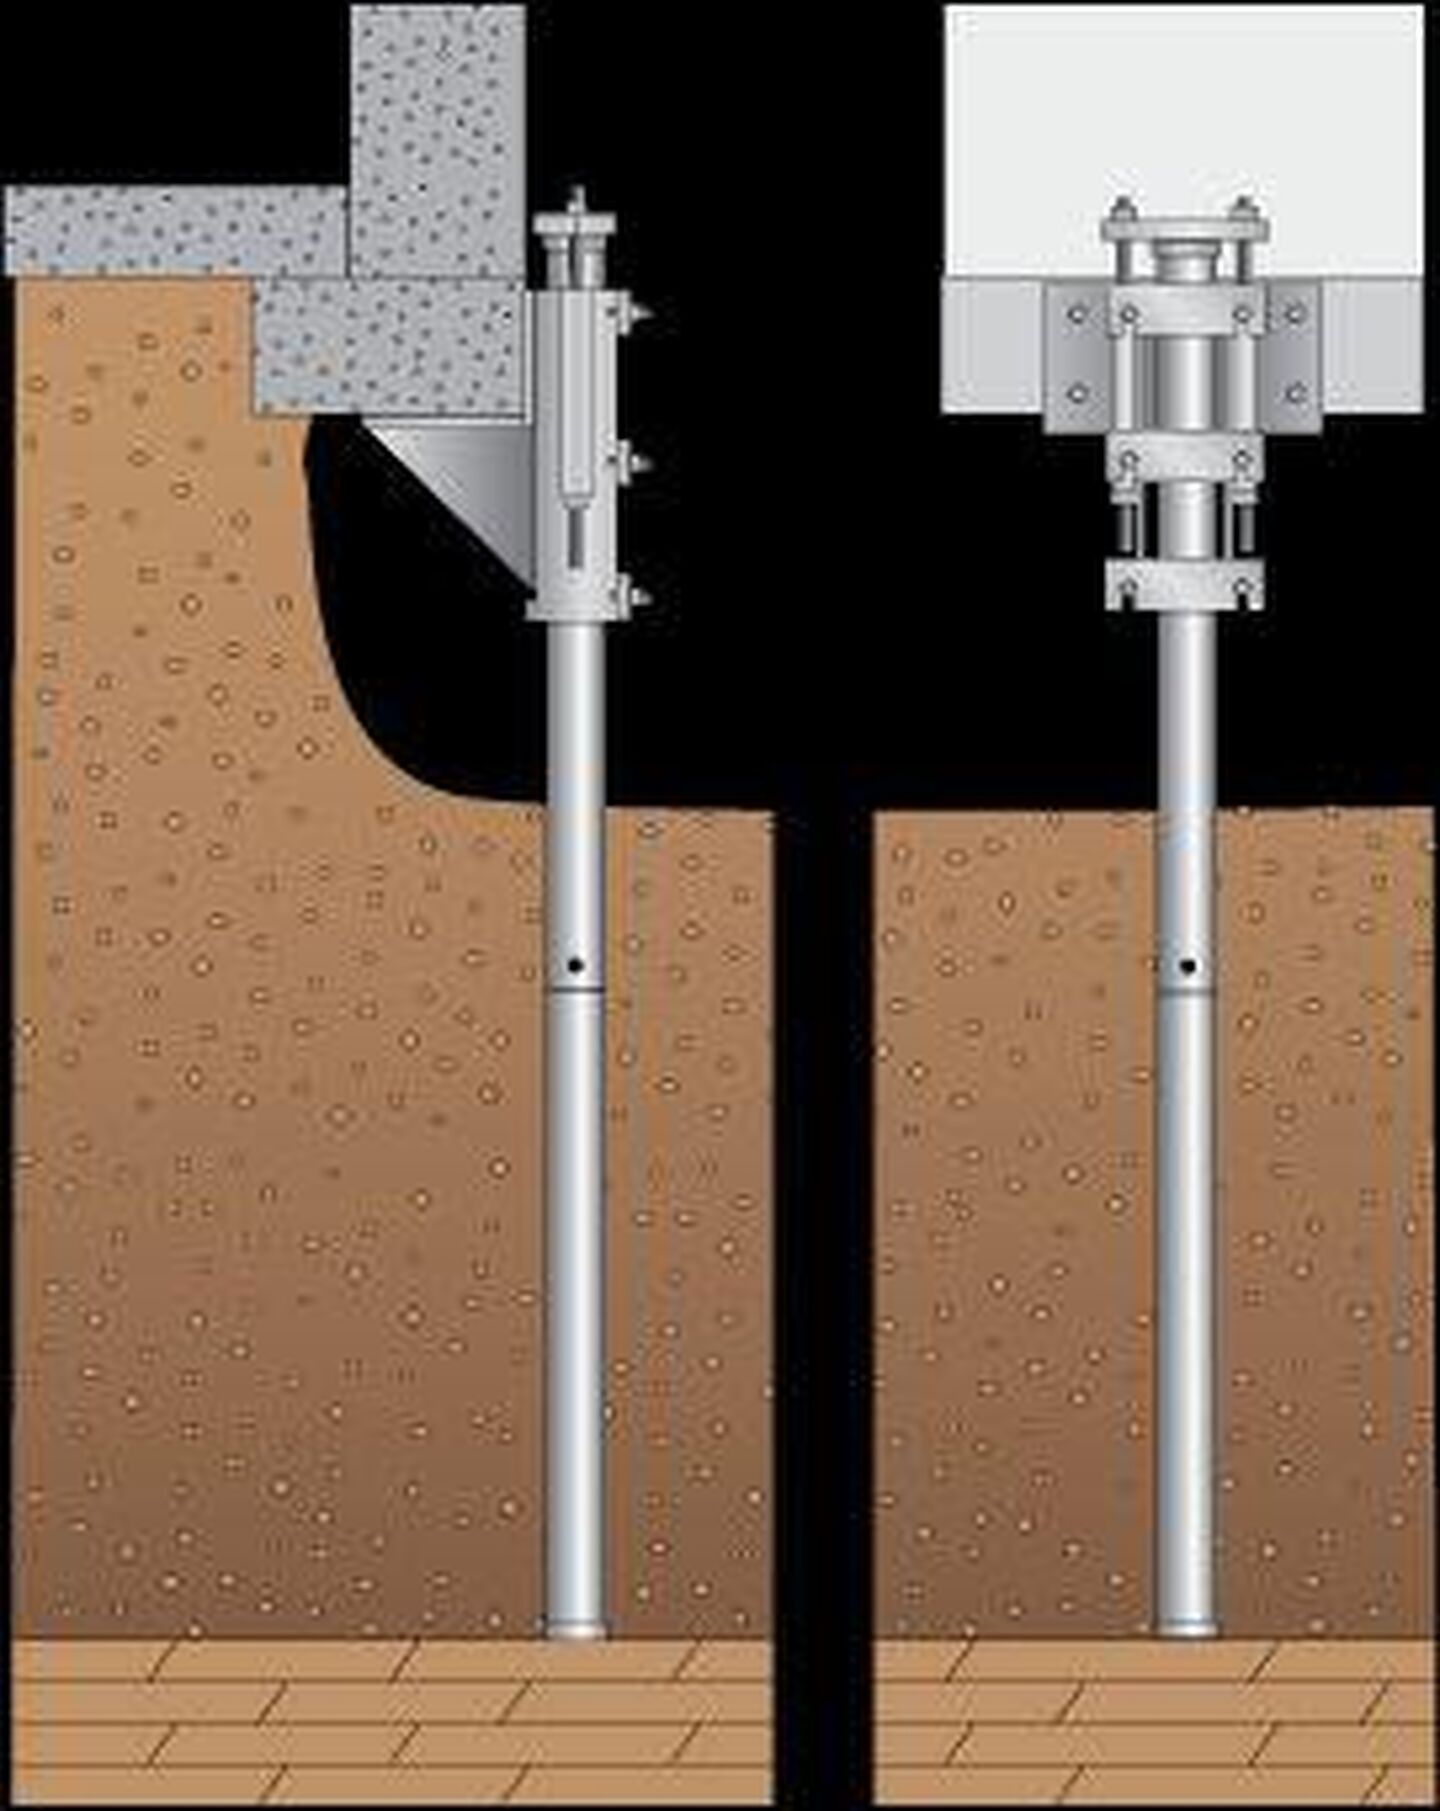 How to Fix Structural Foundation Damage with Hydraulic Push Piers